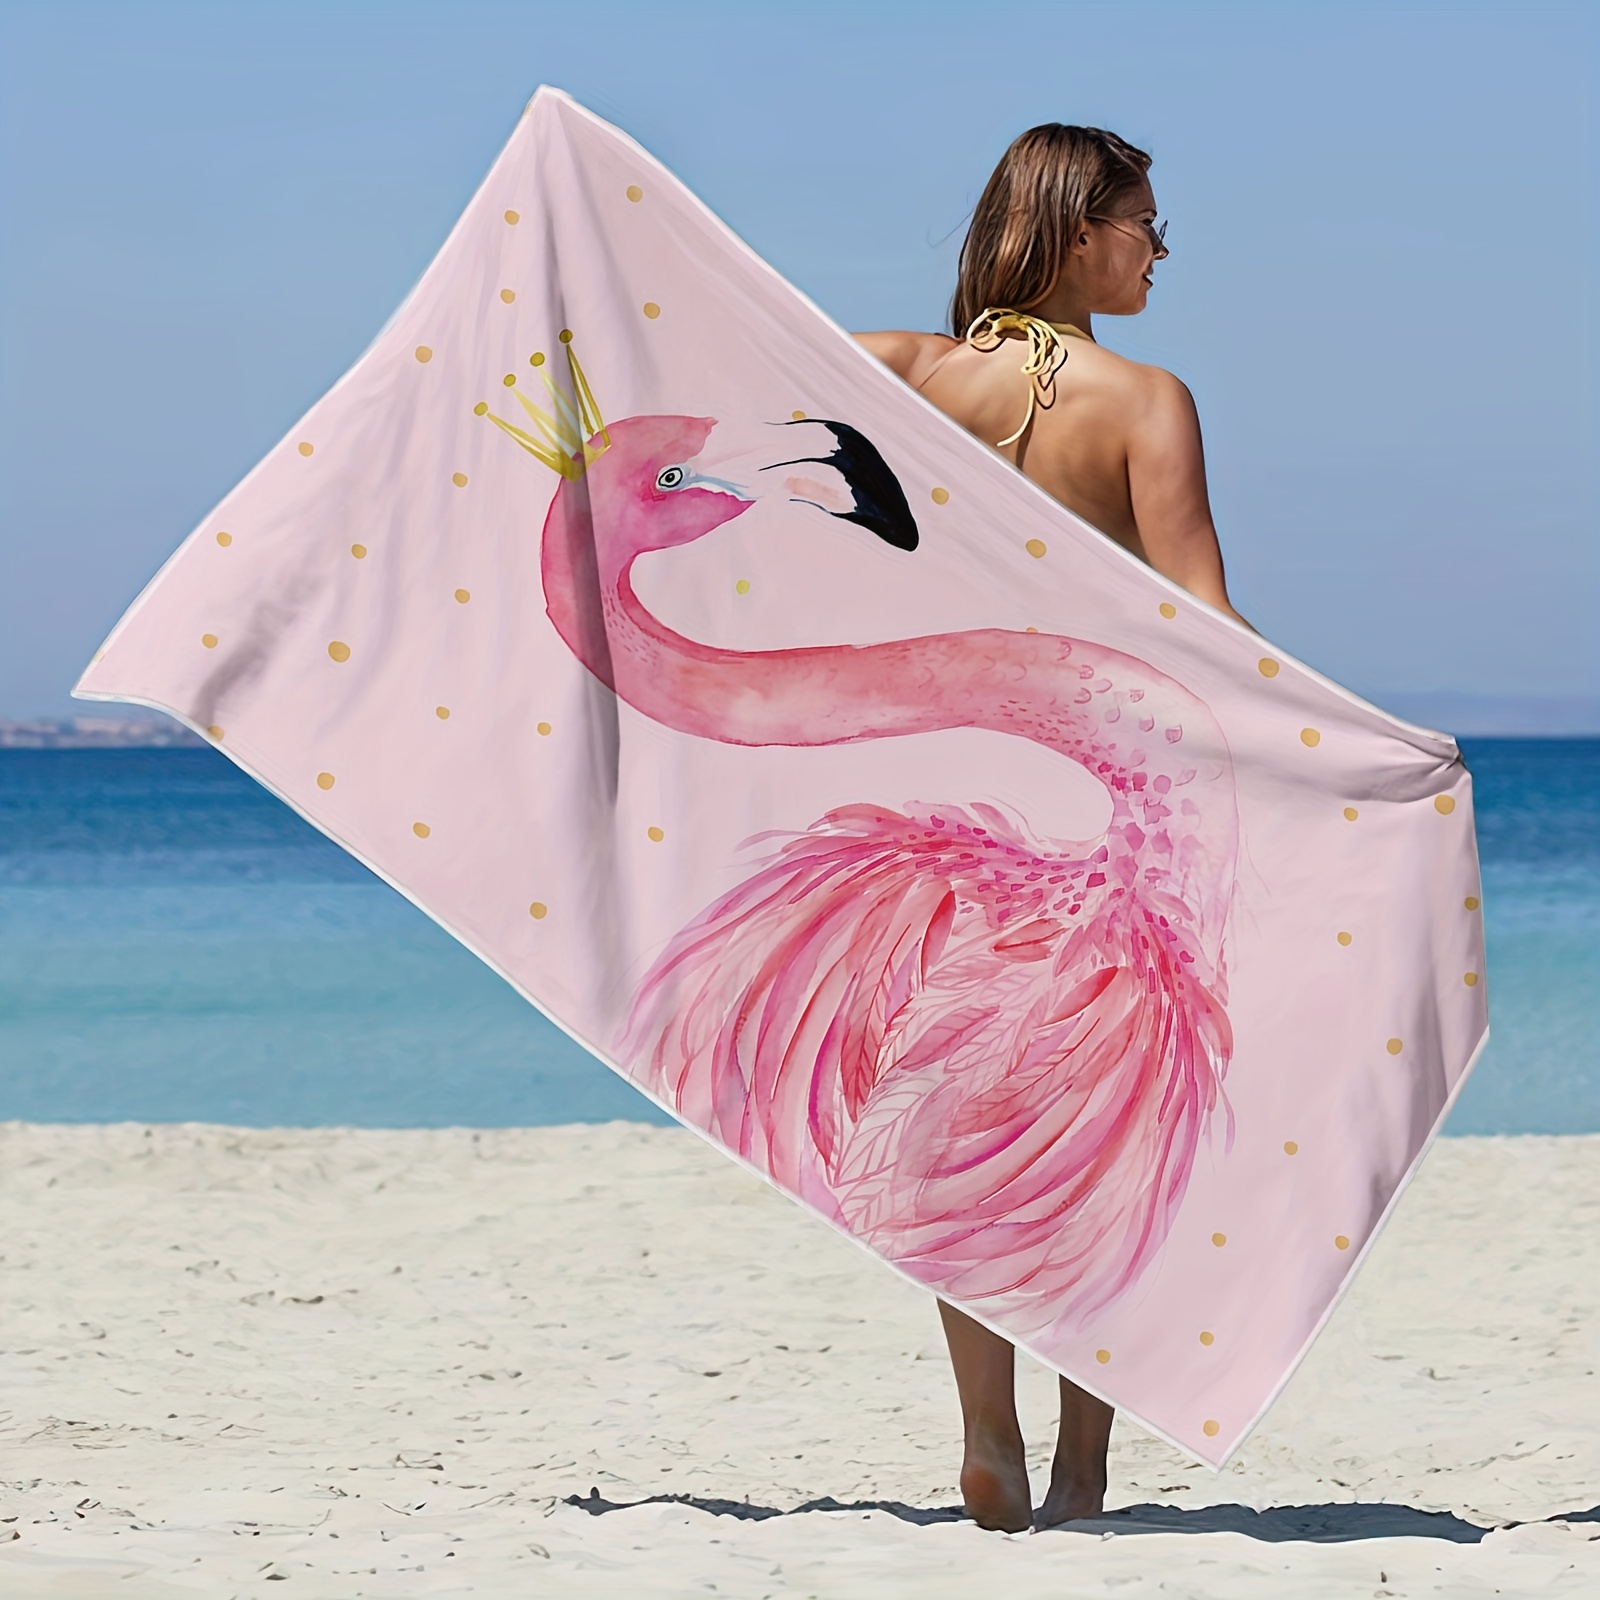 

1pc Flamingo Pink Microfiber Beach Towel - Quick Drying, Absorbent, And Cute Cartoon Print - Perfect For Summer Beach, Pool, Camping, And Vacation